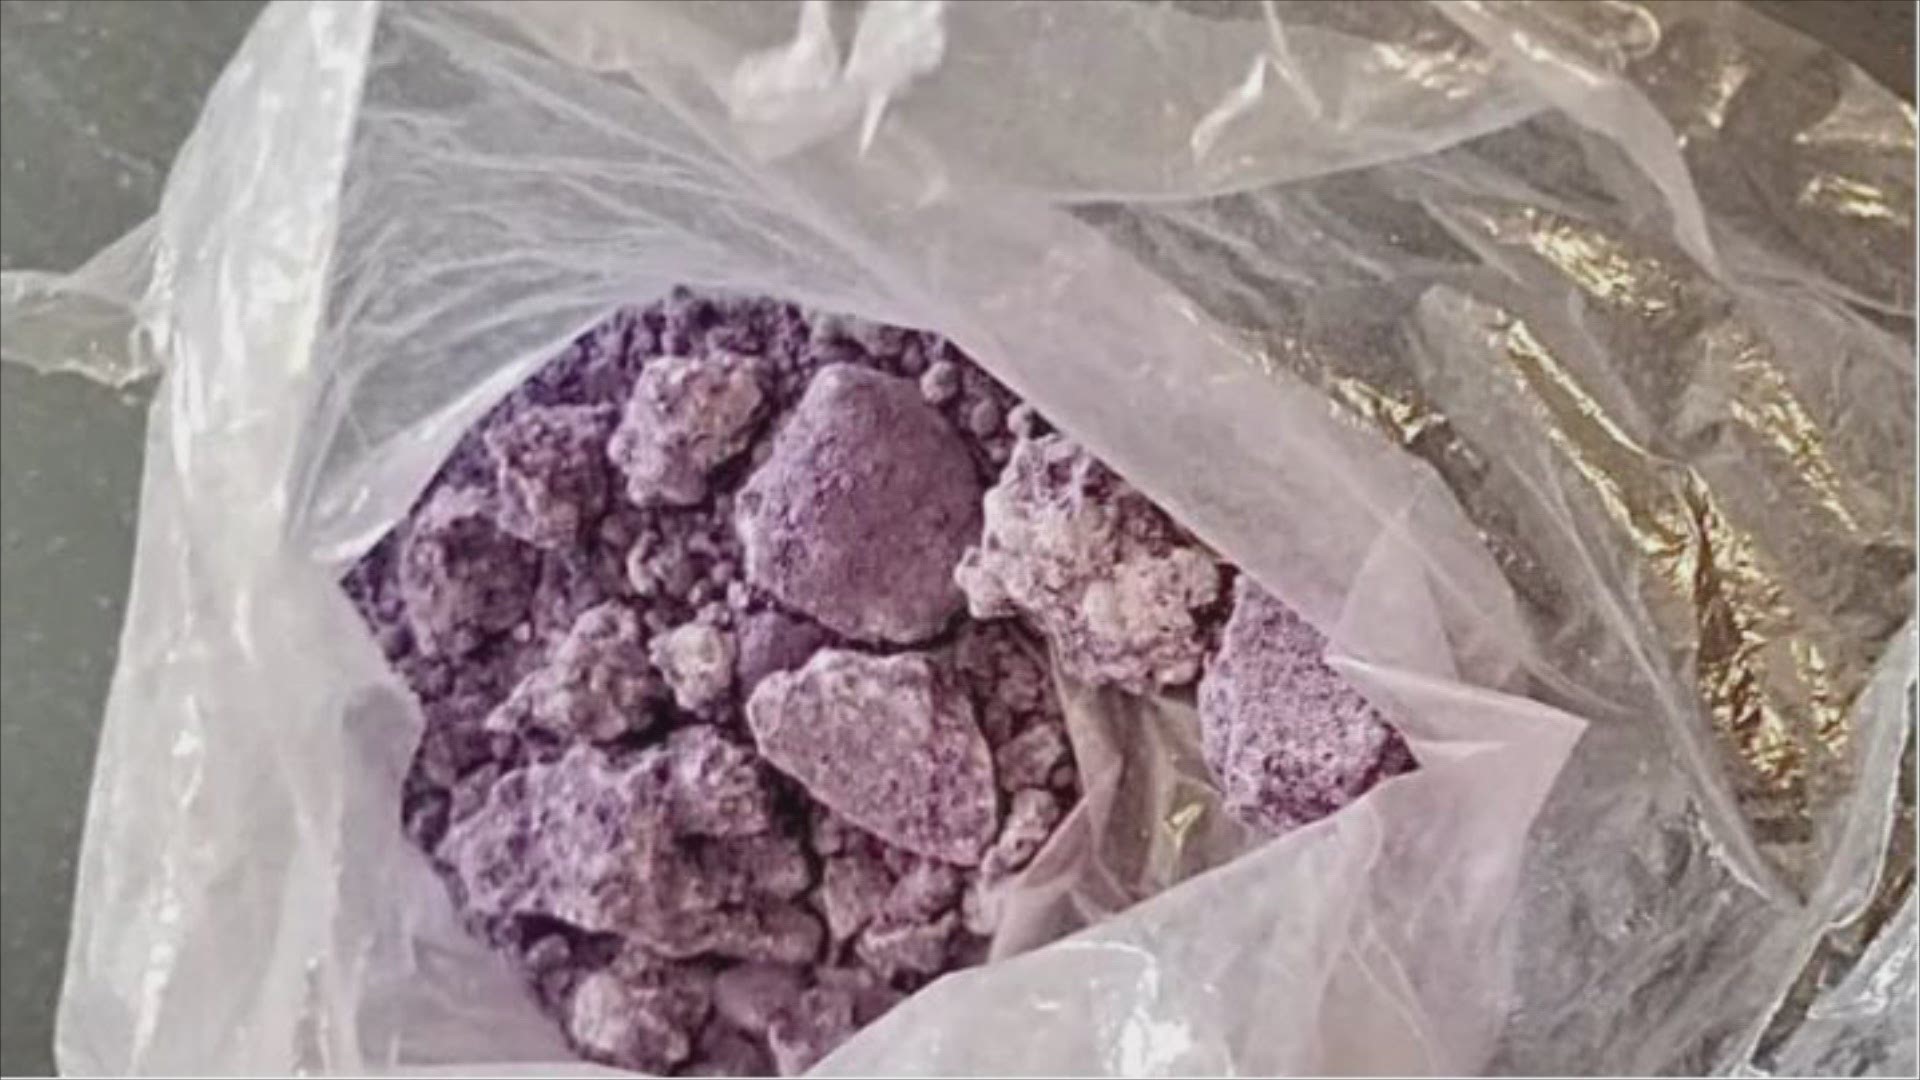 The drug's name comes from its typically purple hue and consists of the synthetic opioid fentanyl, acetaminophen, and a new drug called brorphine.